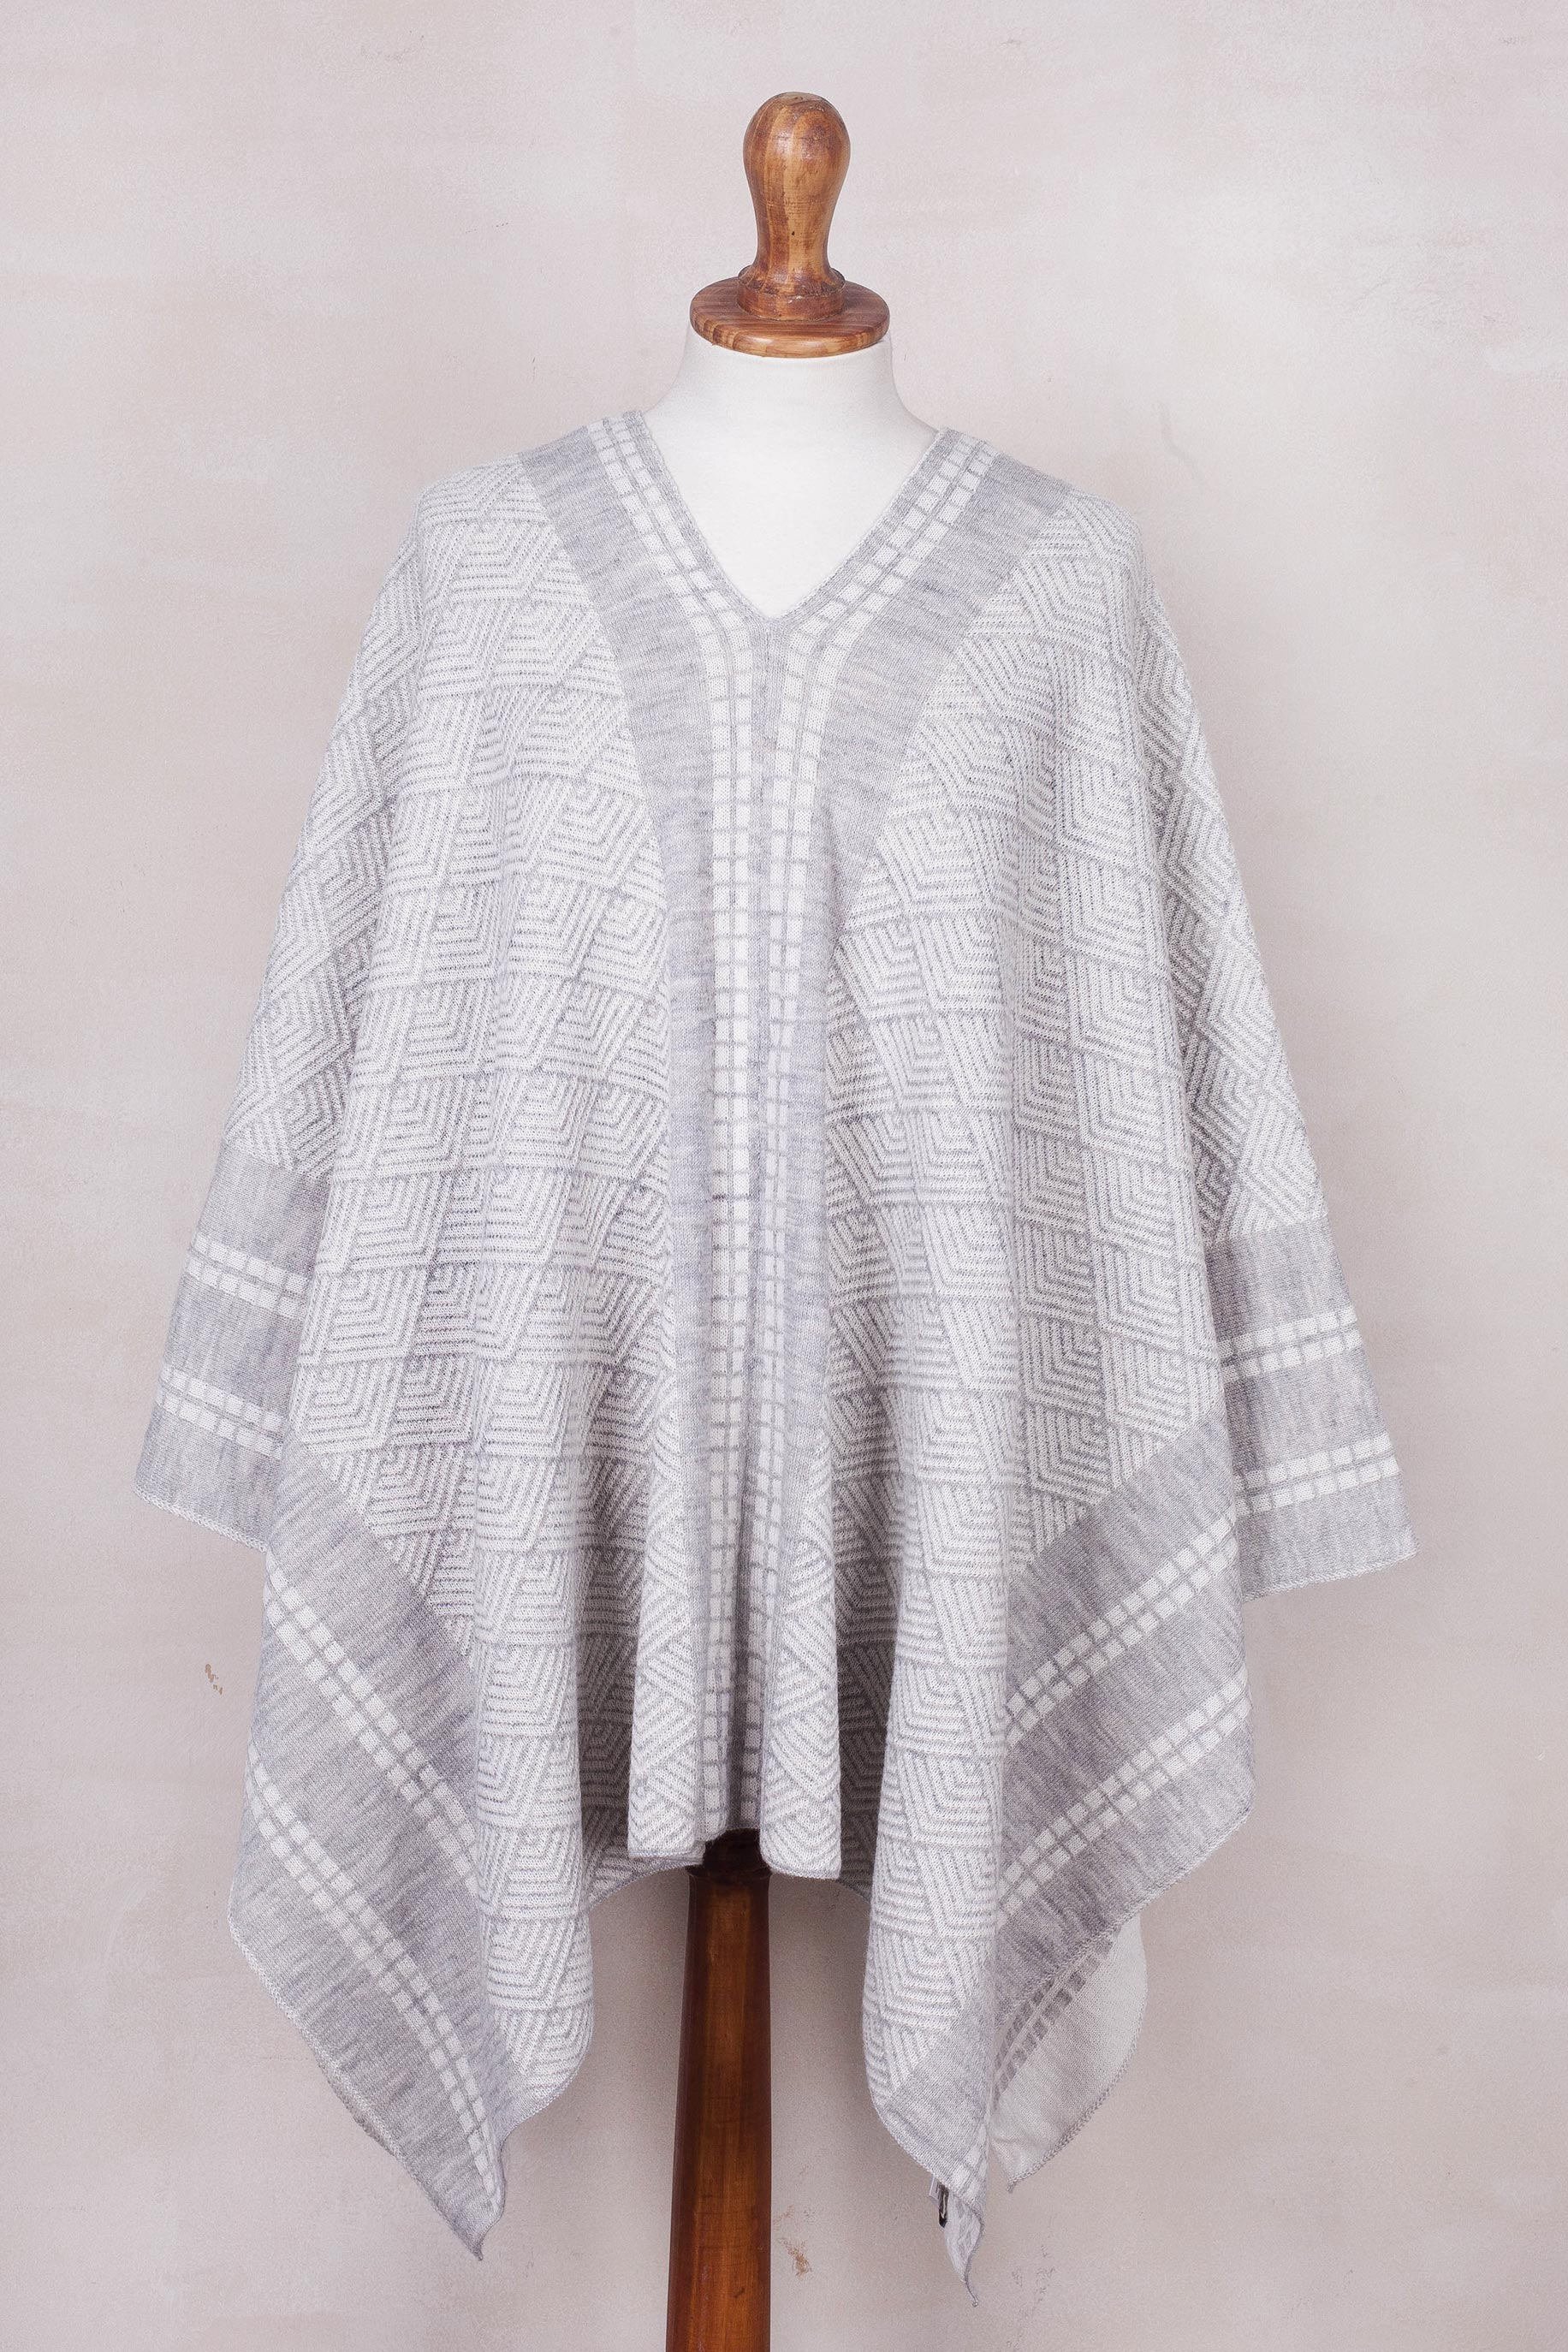 Grey and White Patterned Alpaca Blend Knit Poncho from Peru - Grey ...